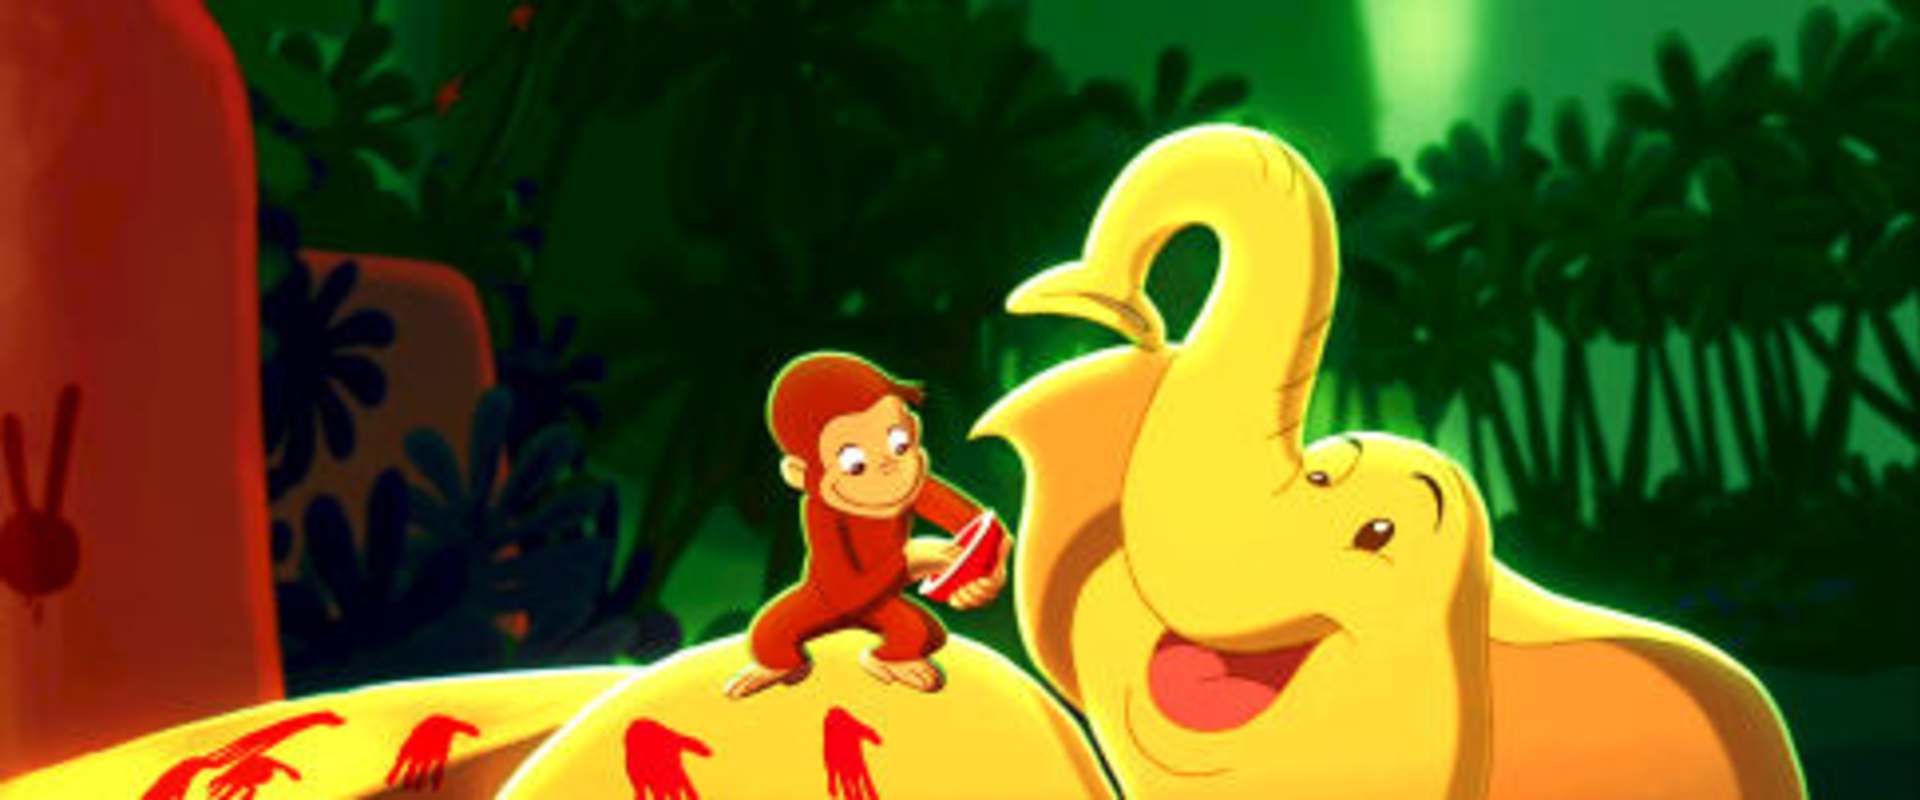 Curious George background 2